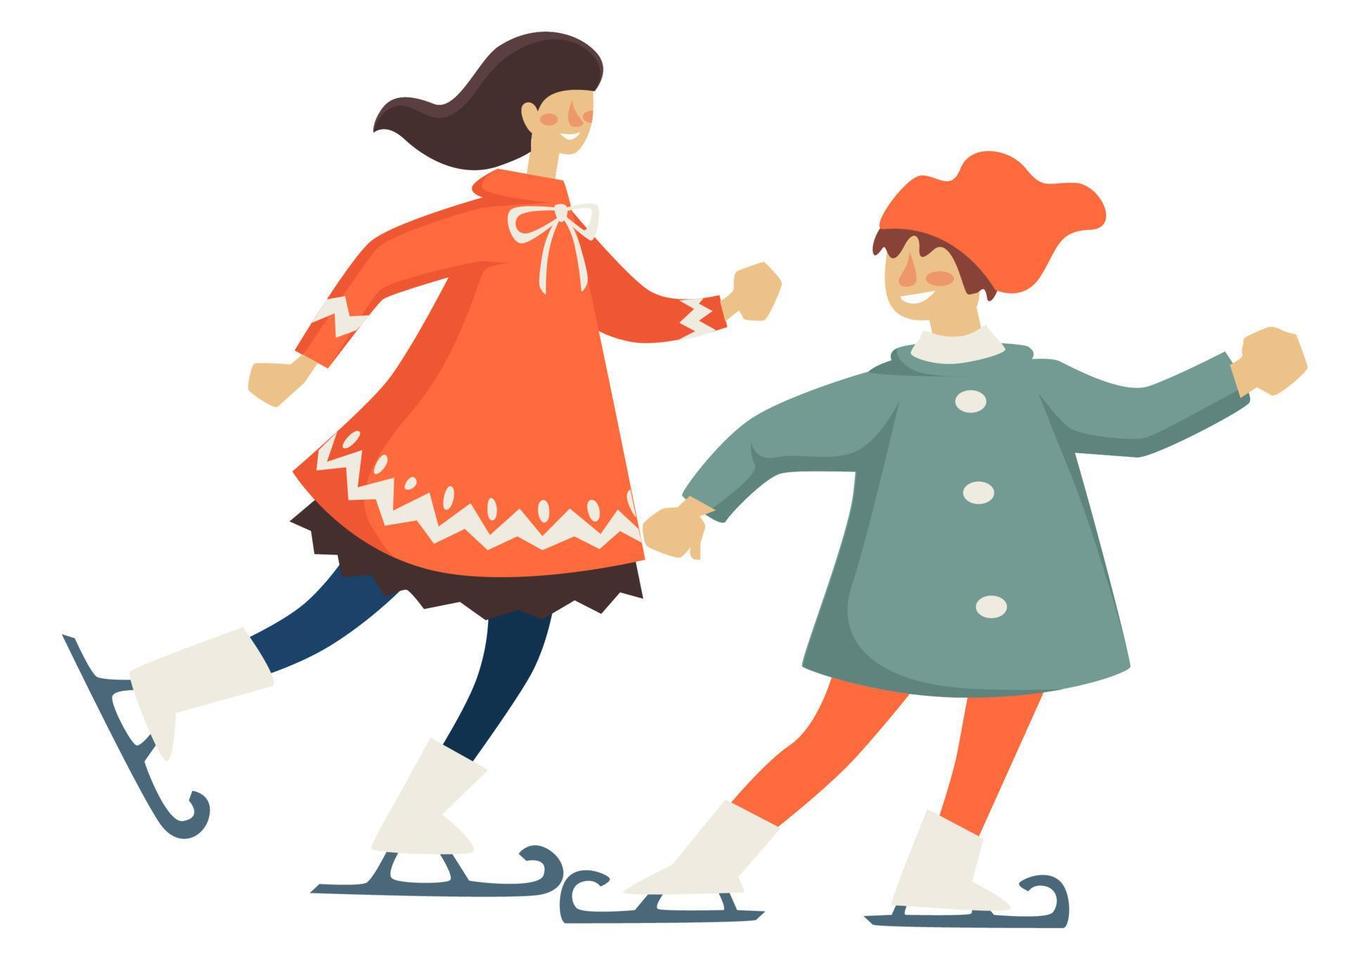 Mom and kid figure skating on ice rink vector